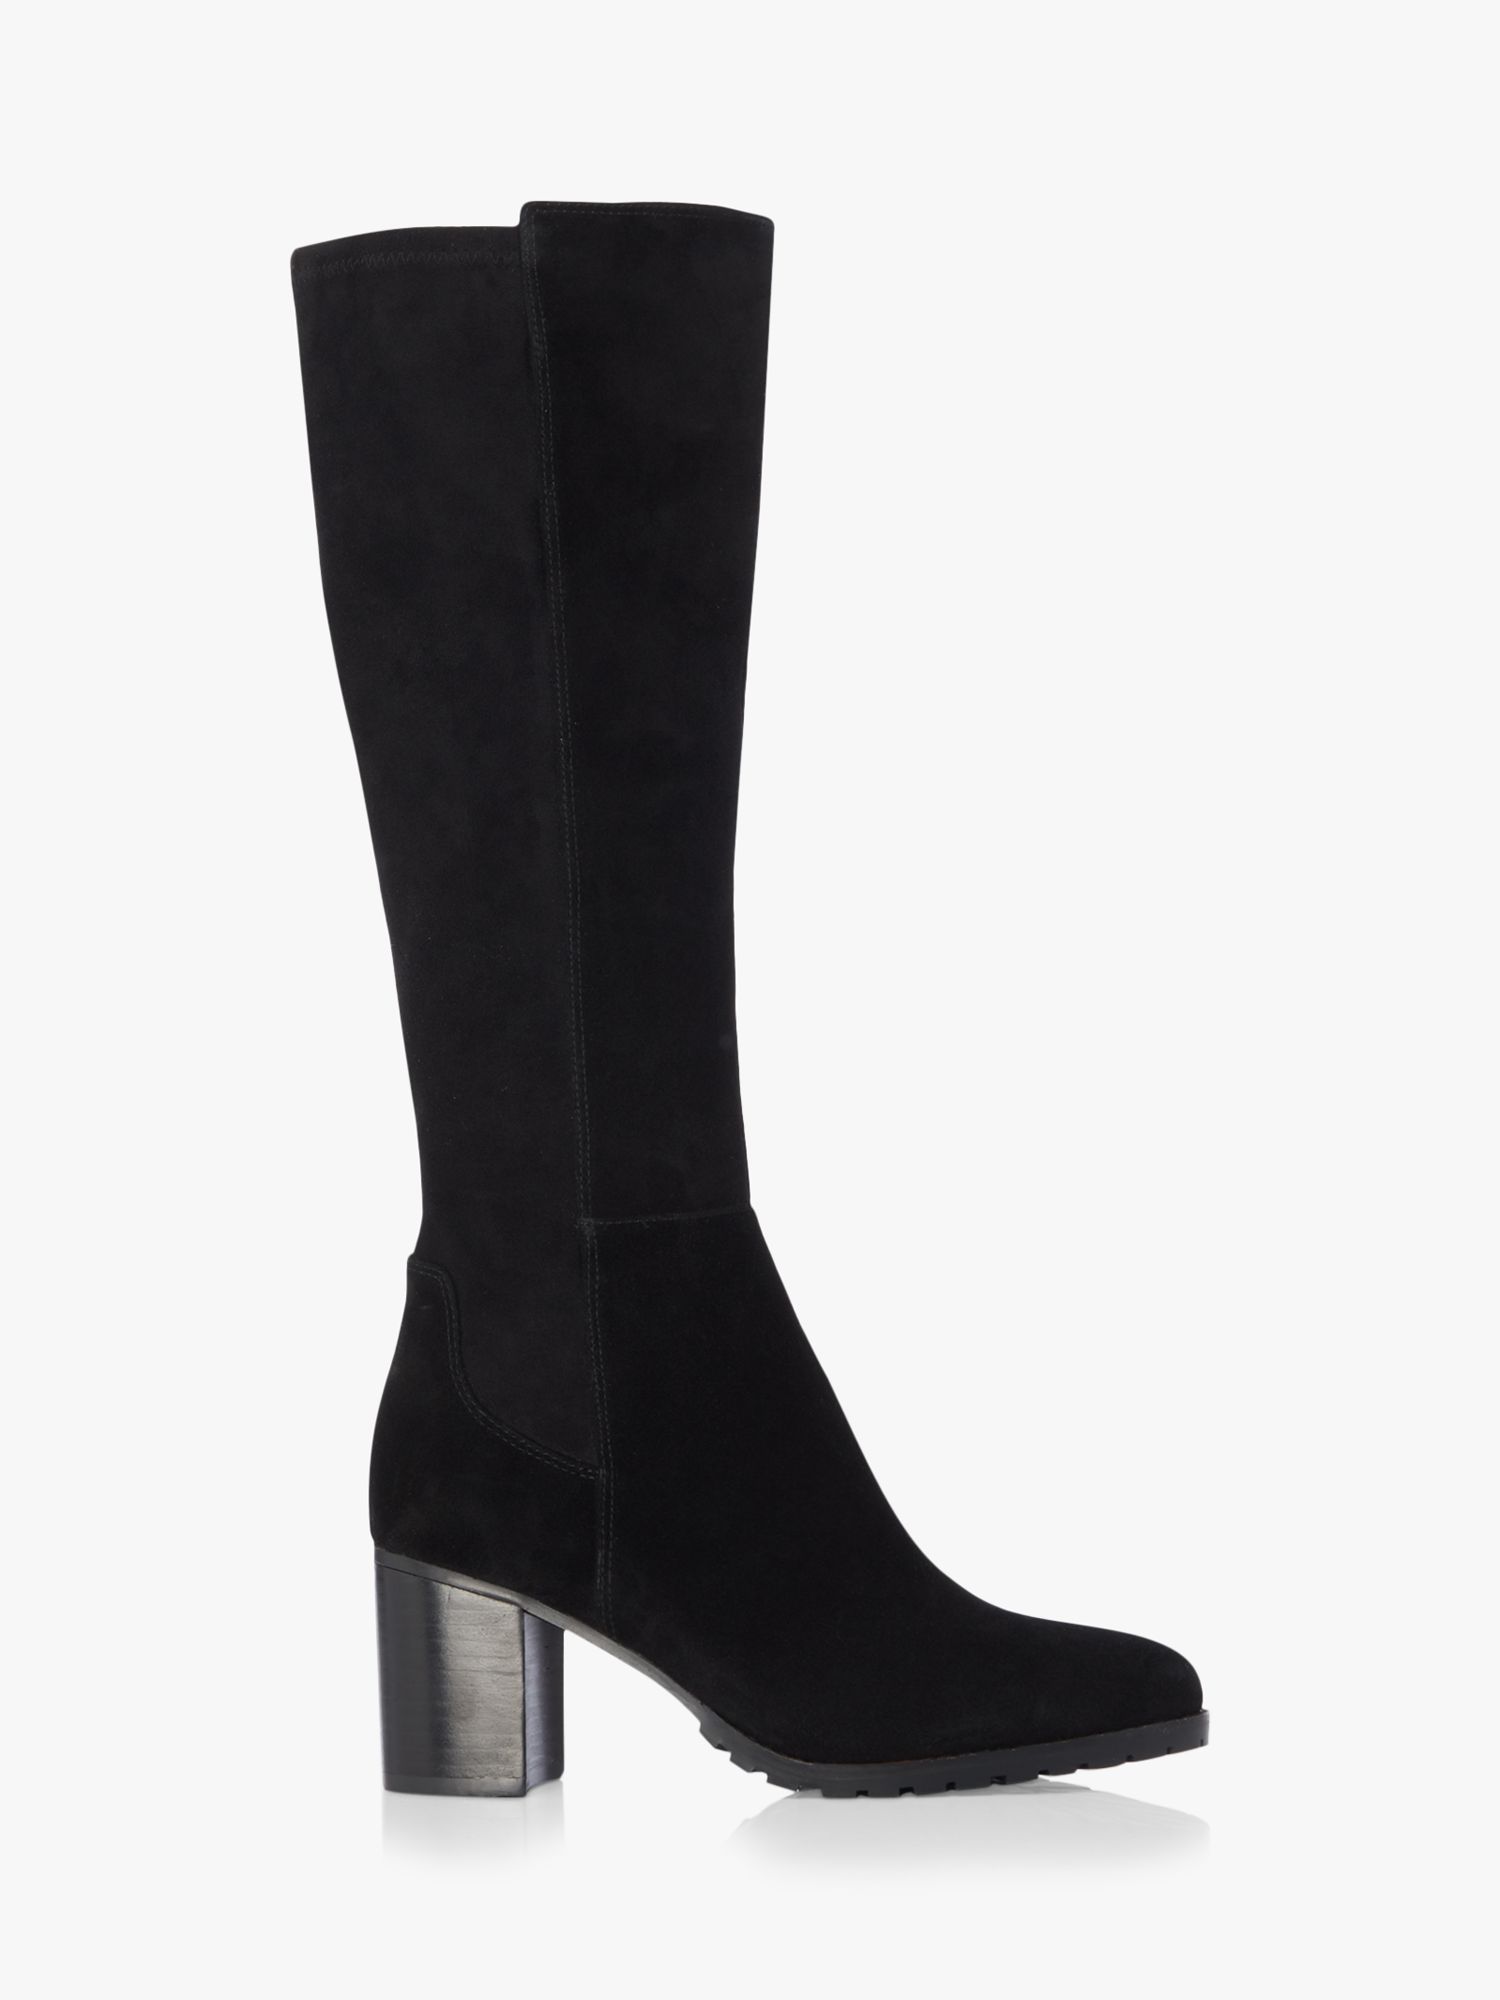 Dune Titain Suede Stretch Cleated Knee High Block Heel Boots, Black at ...